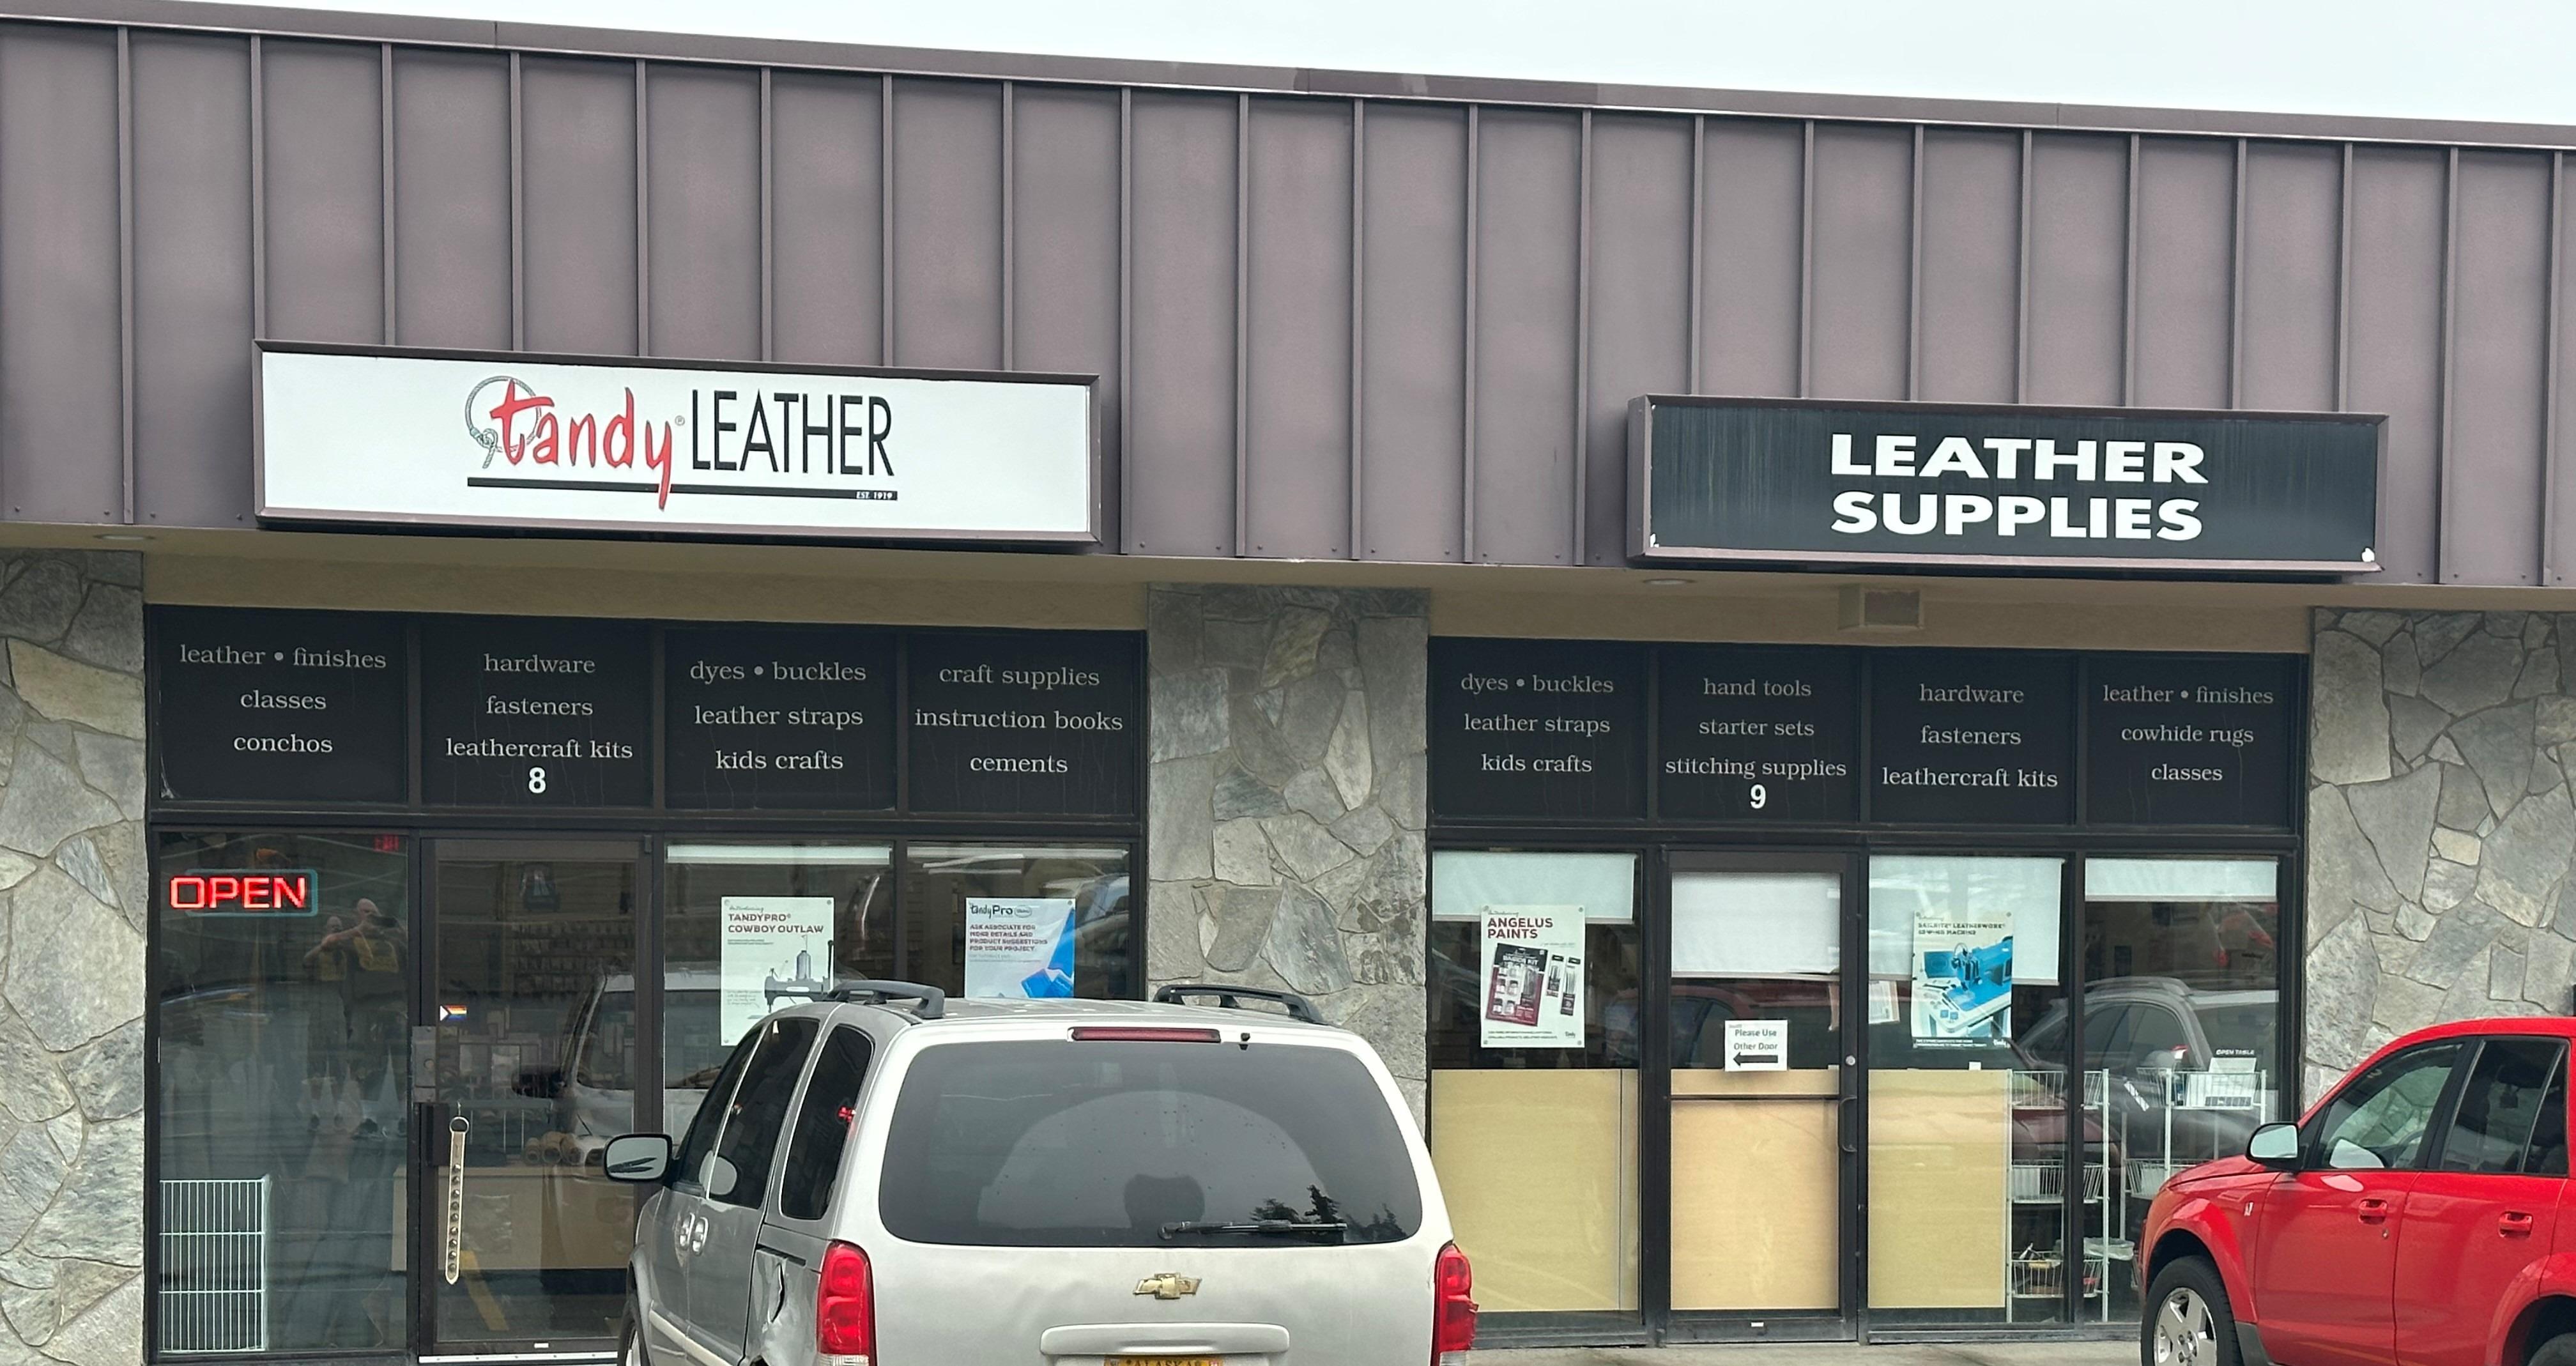 Austin South Store #186 — Tandy Leather, Inc.